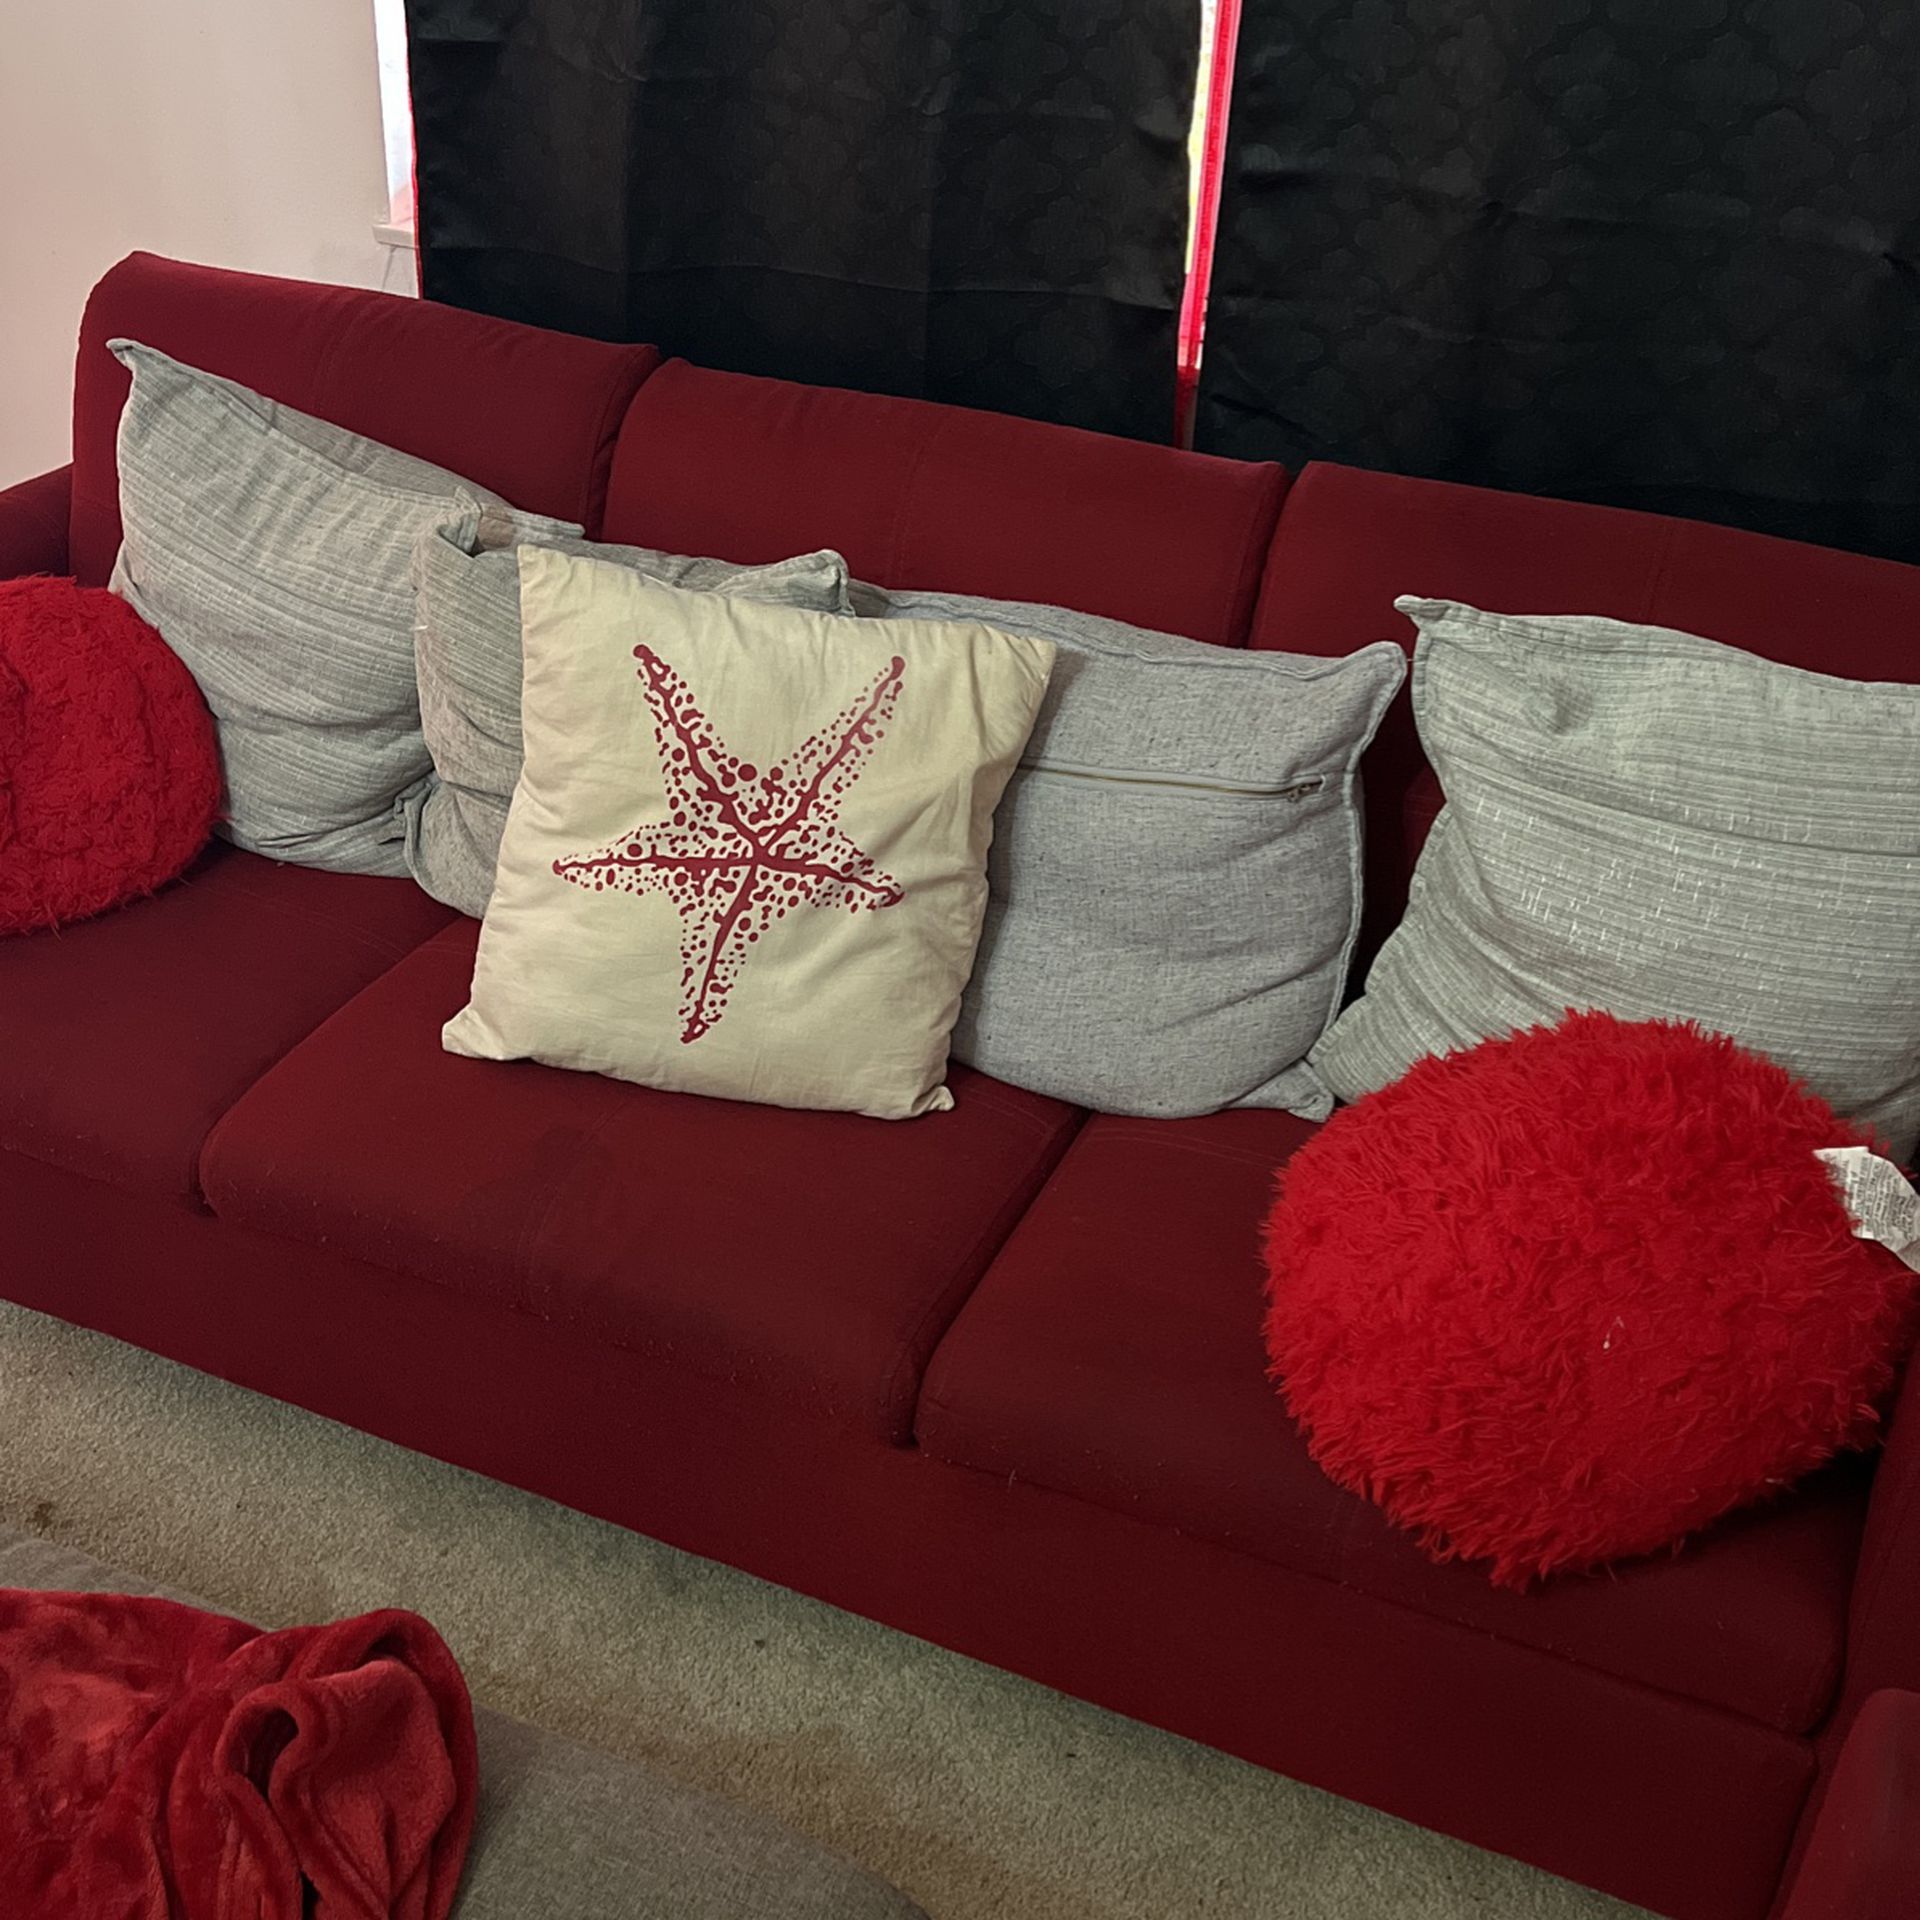 Use Red Couches For Sale